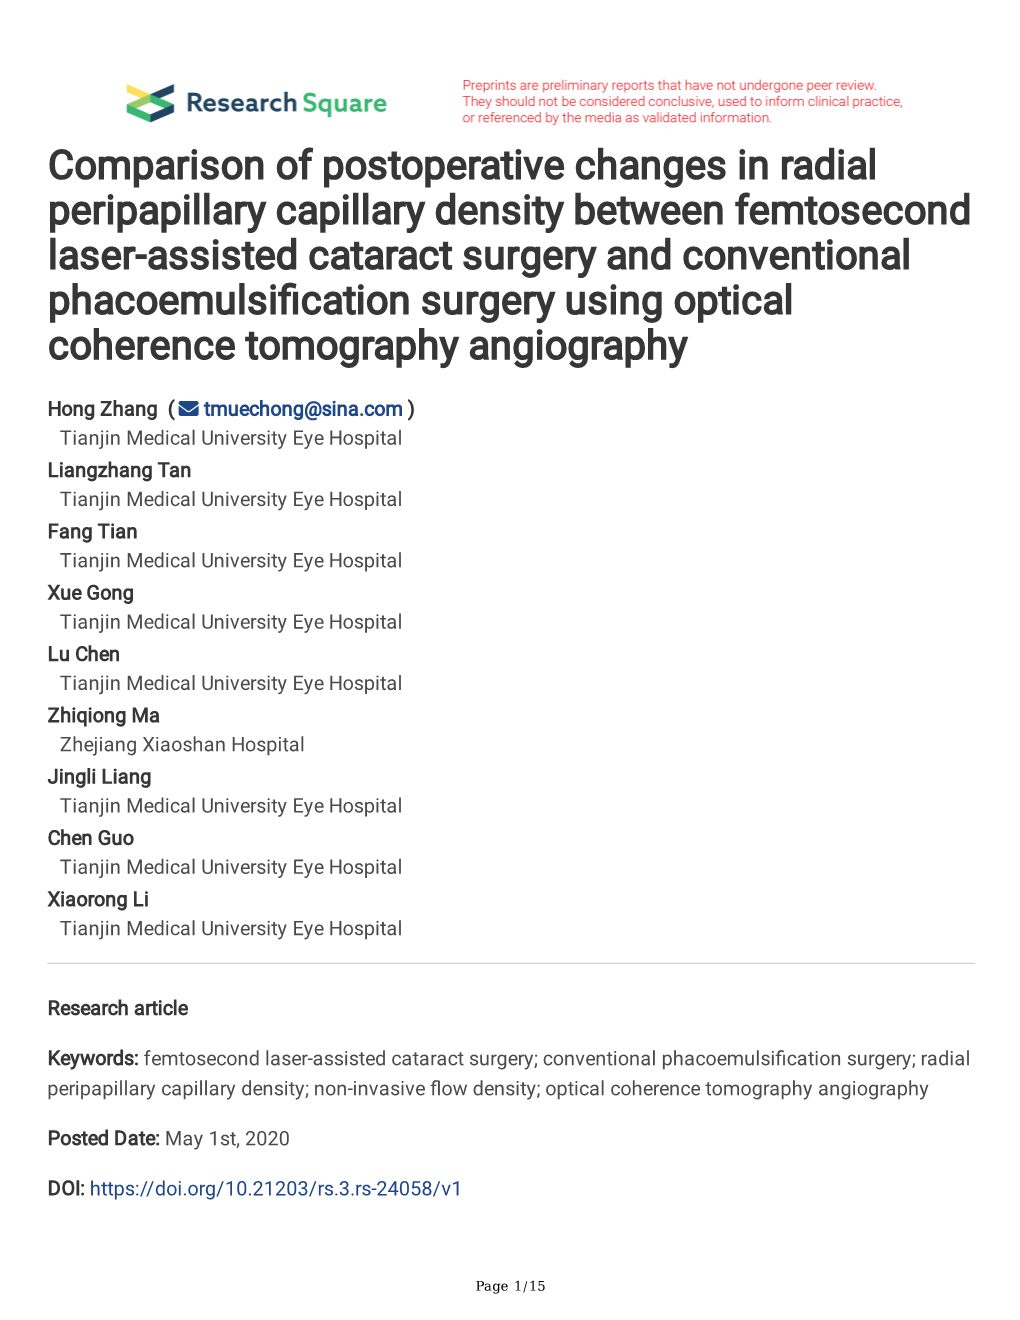 Comparison of Postoperative Changes in Radial Peripapillary Capillary Density Between Femtosecond Laser- Assisted Cataract Surge